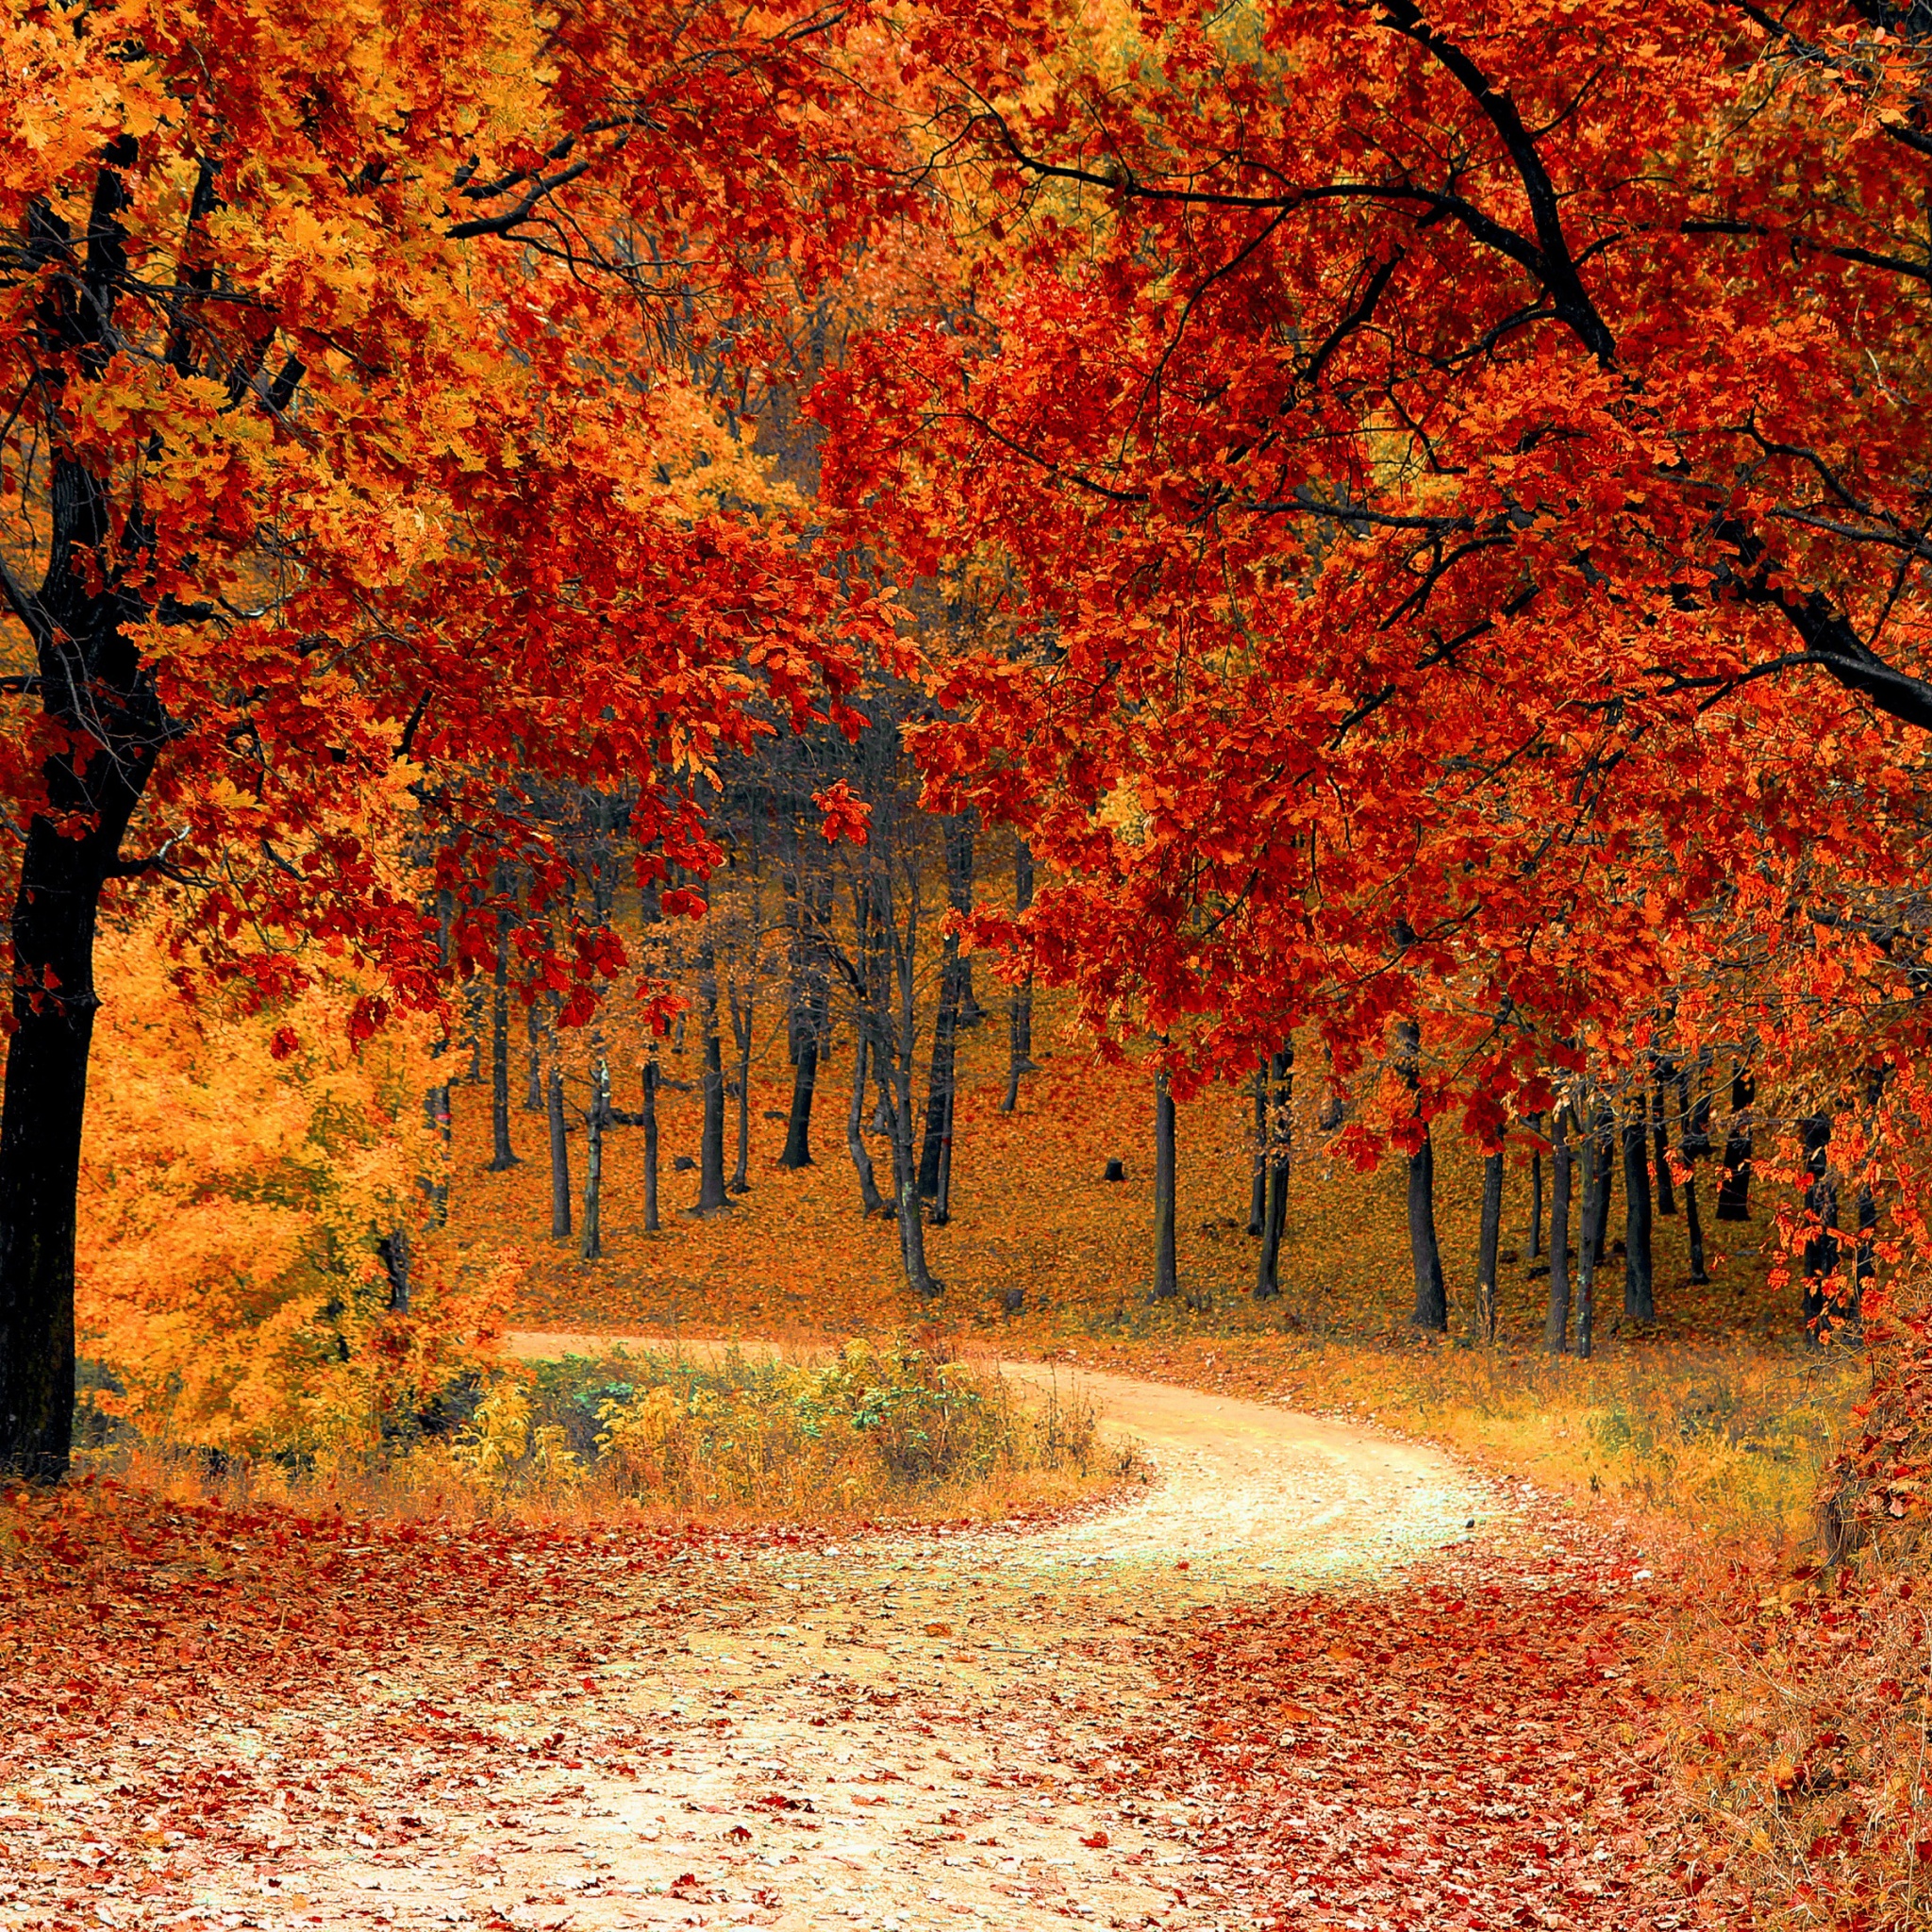 Road Right In The Autumn